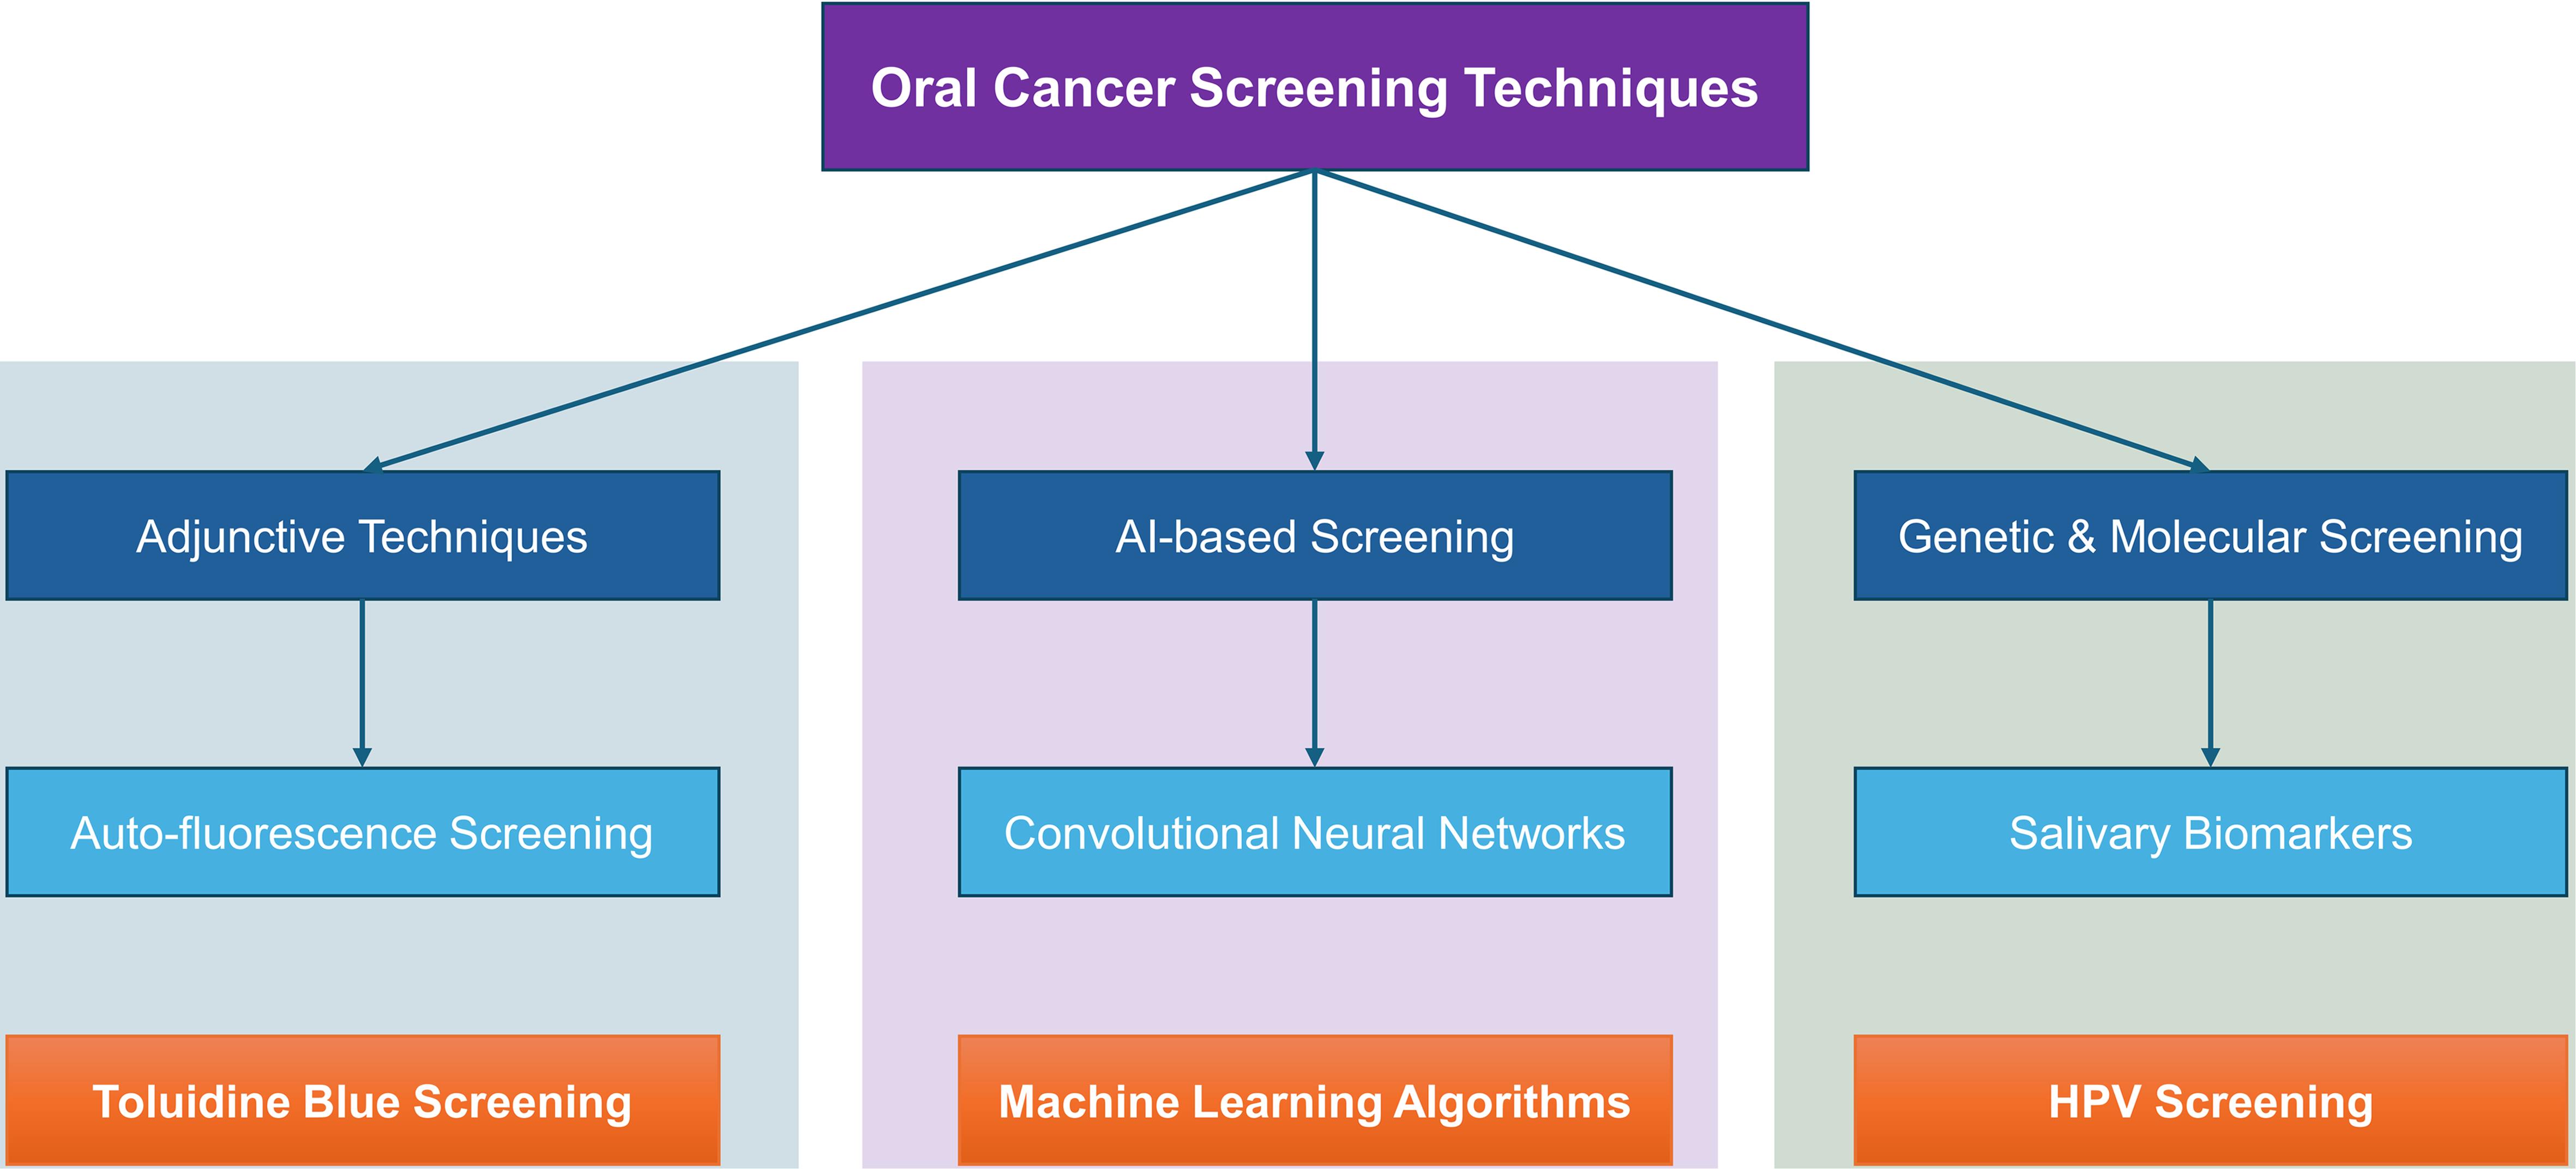 Oral cancer screening techniques.